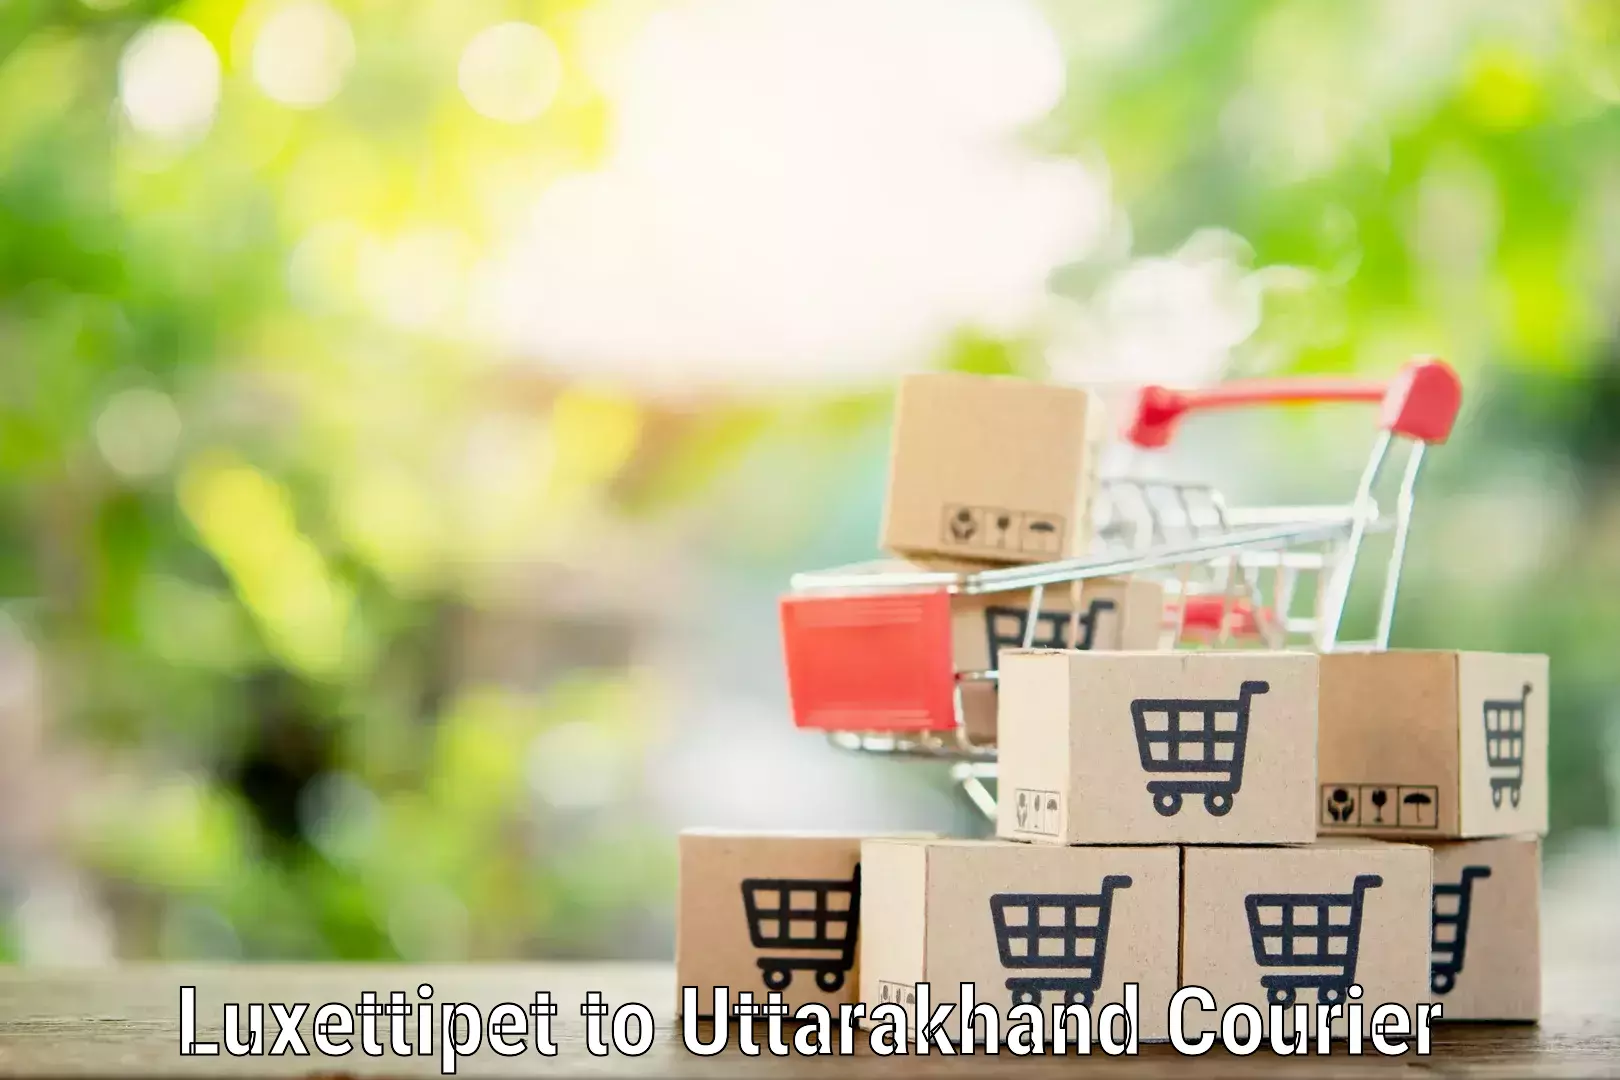 Reliable goods transport Luxettipet to Rishikesh